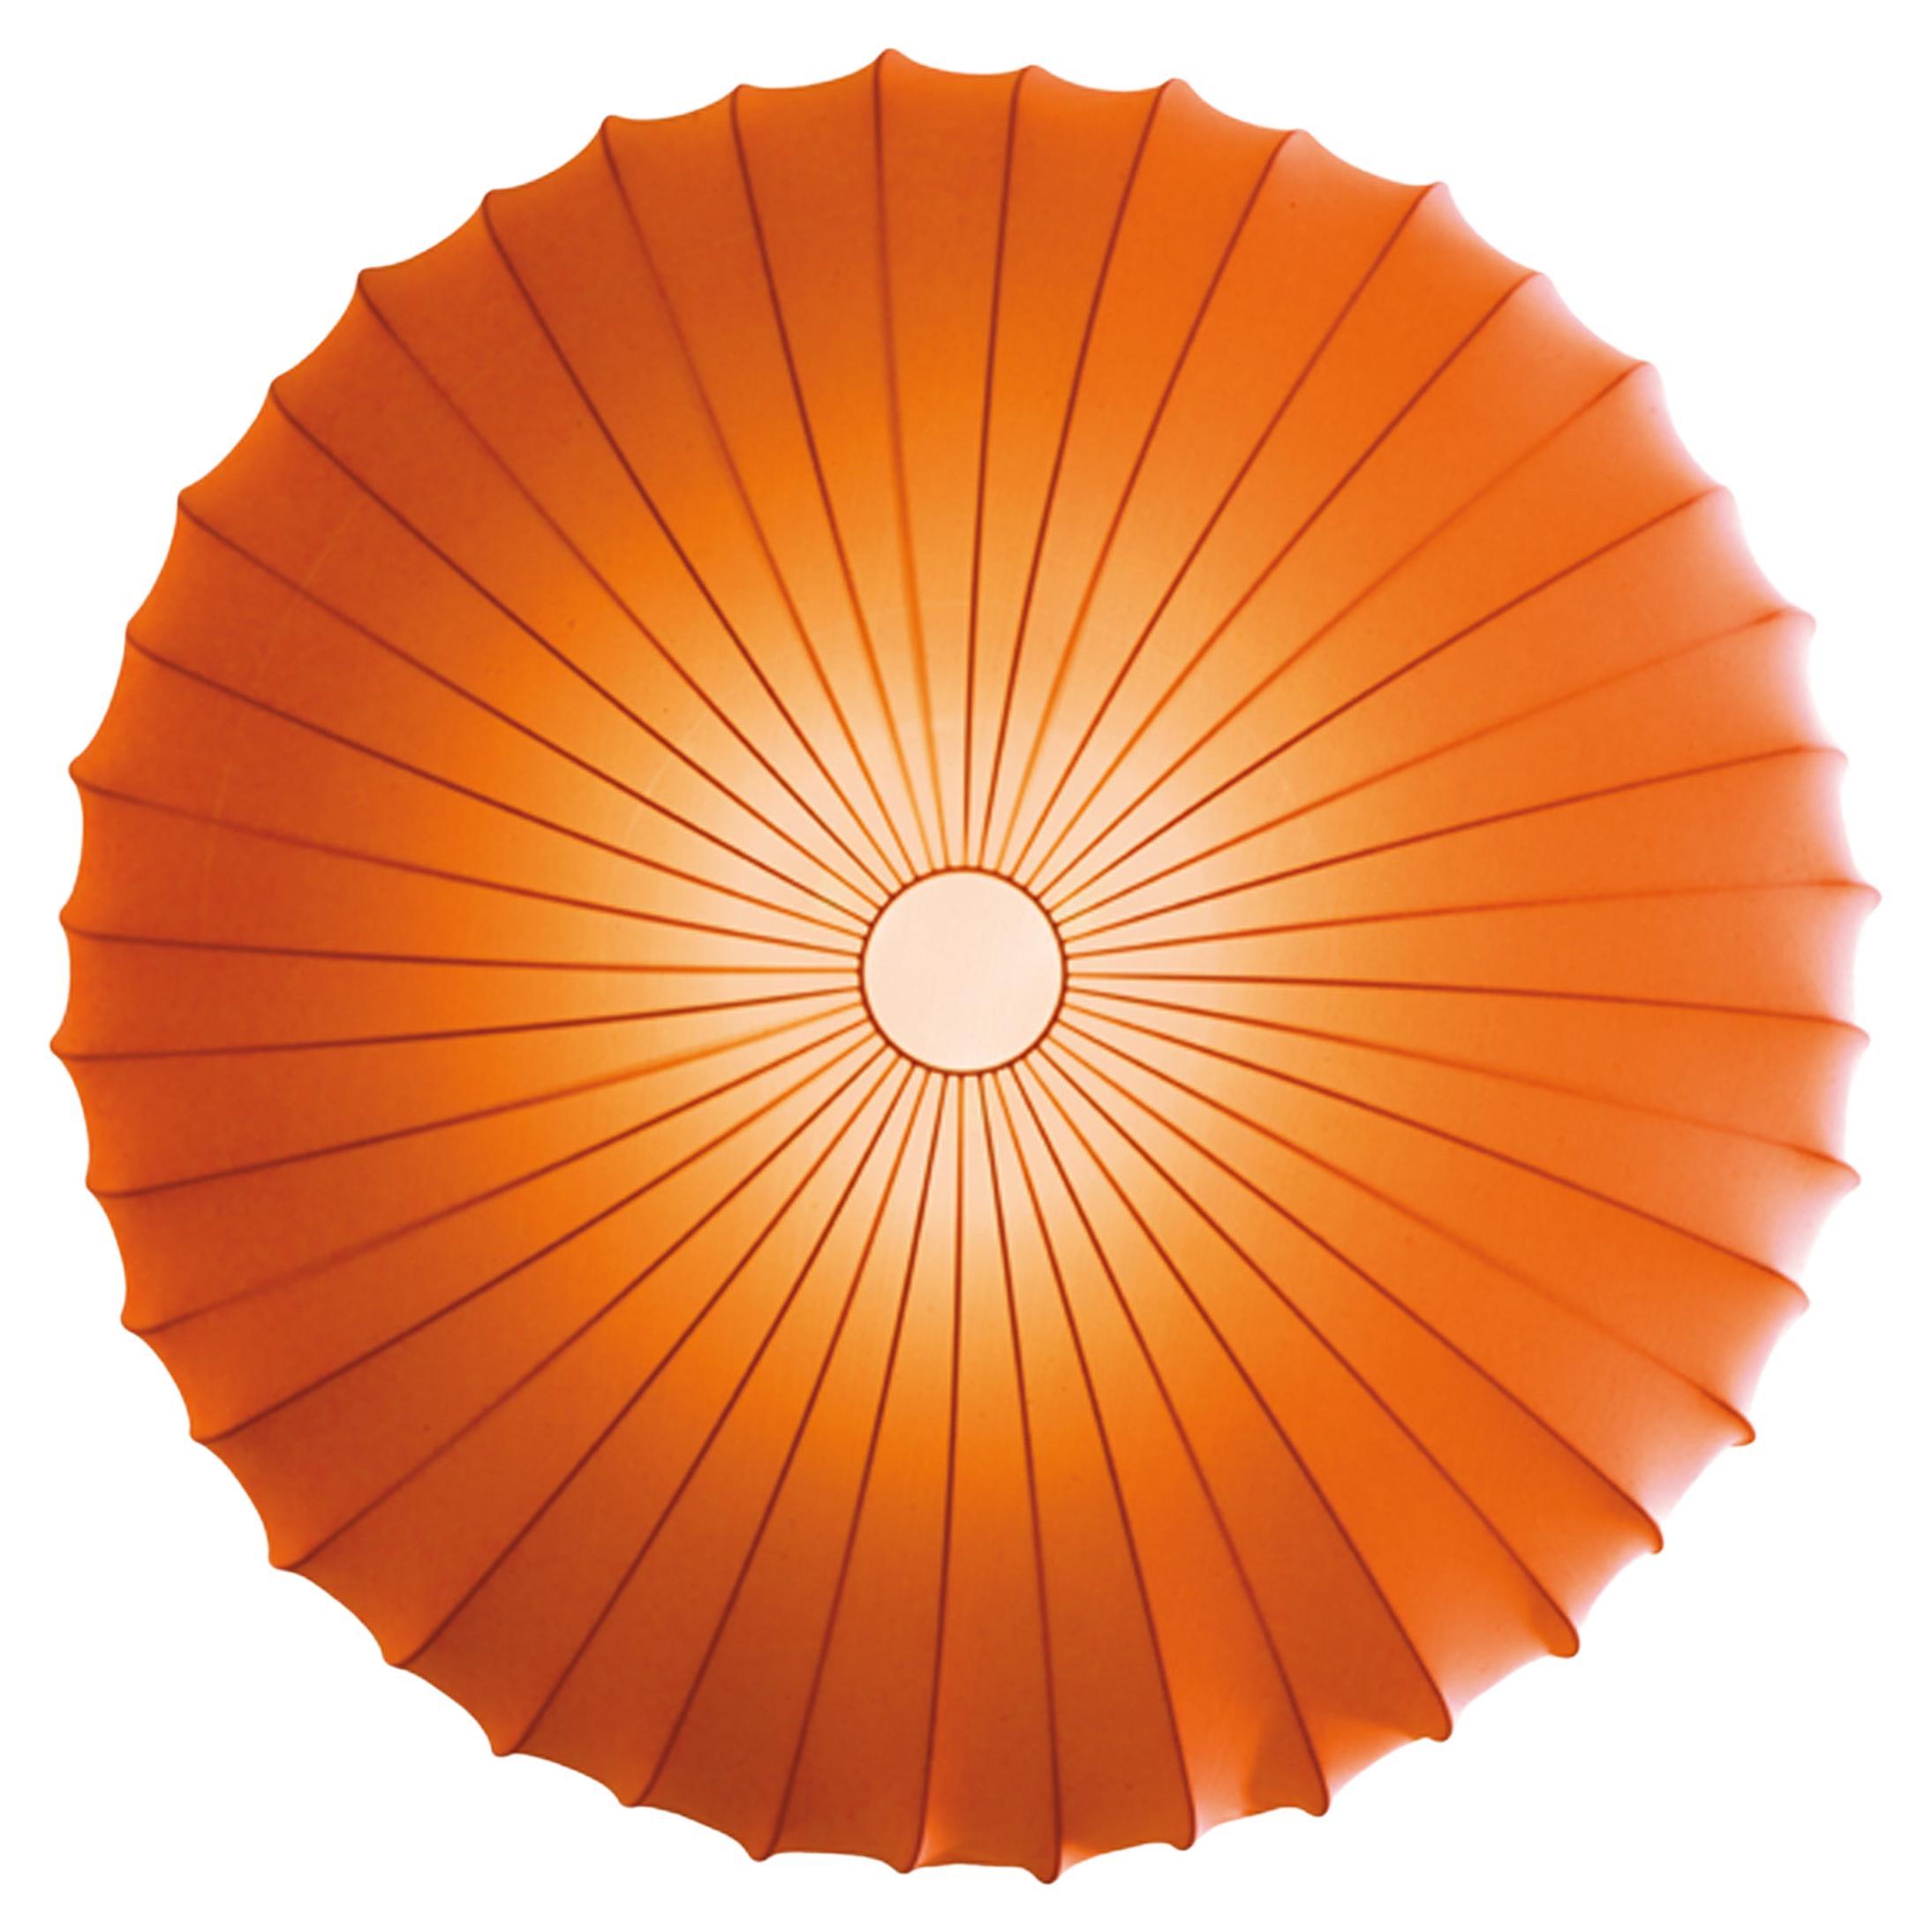 Axolight Muse Large Ceiling Light in Orange with White Metal Finish For Sale